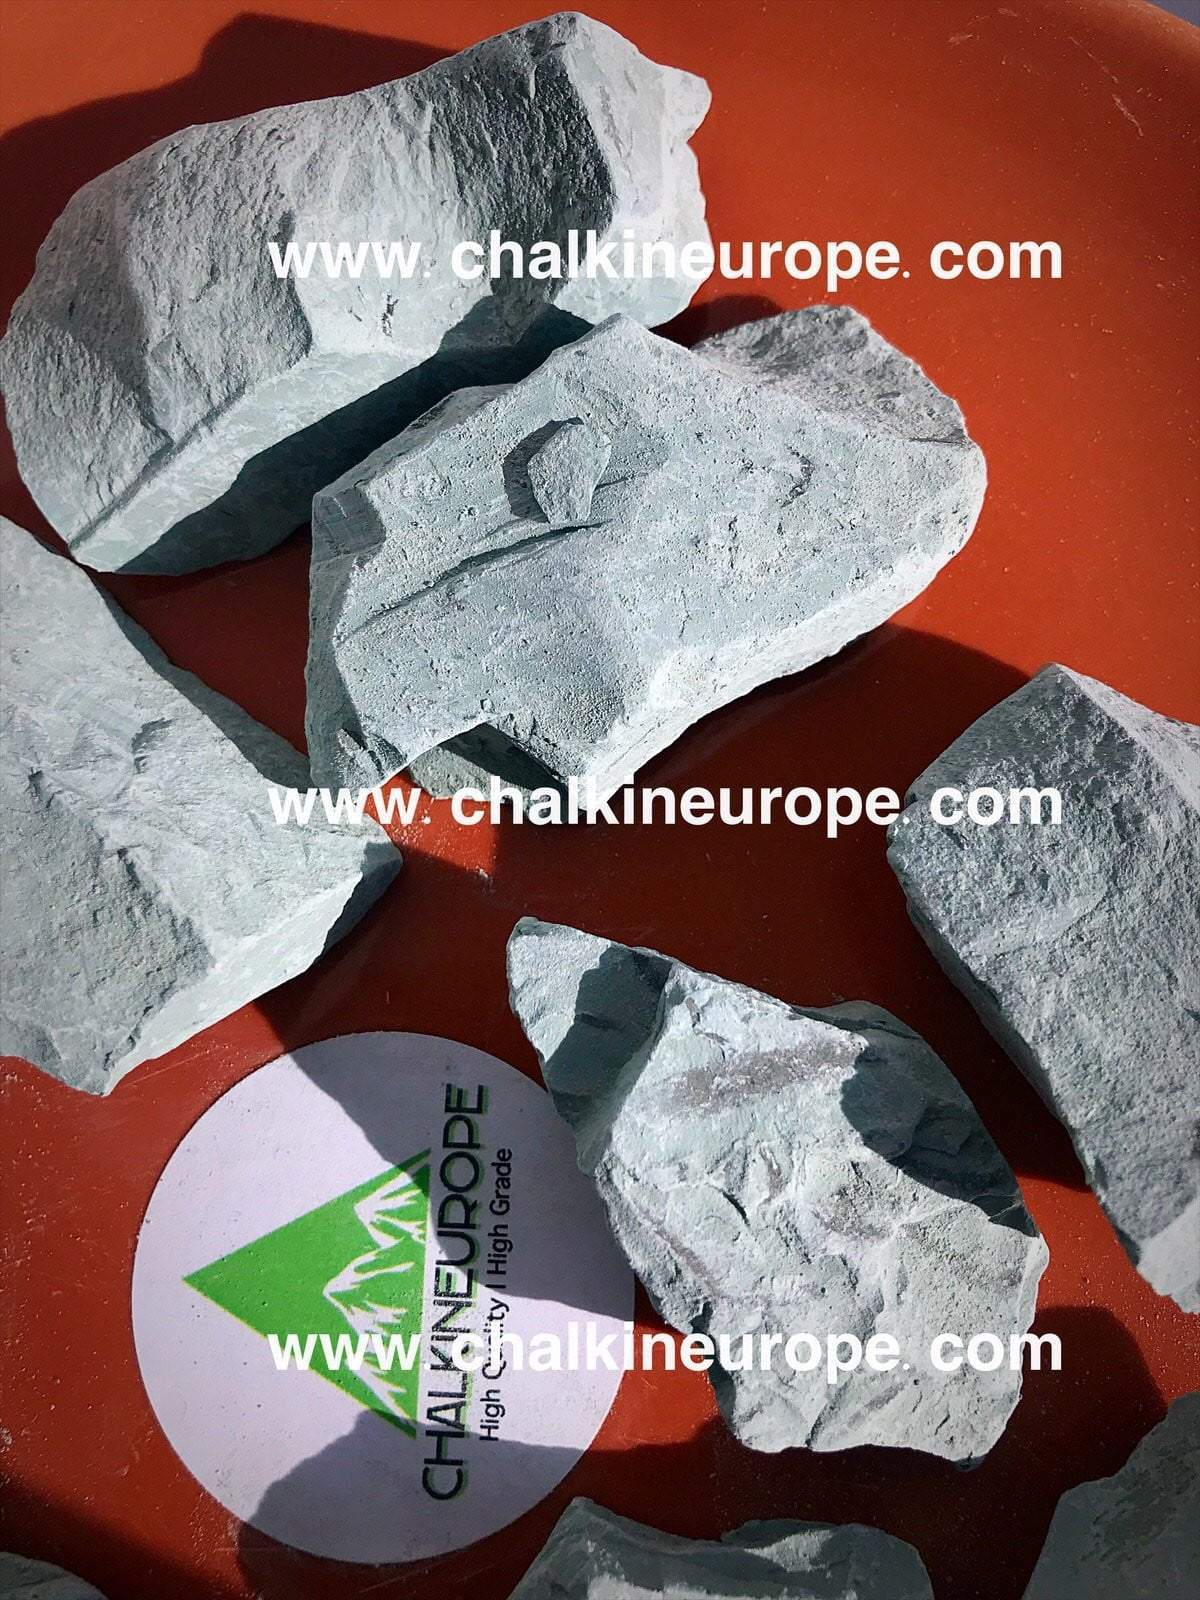 Cambrian Blue Clay - Chalkineurope